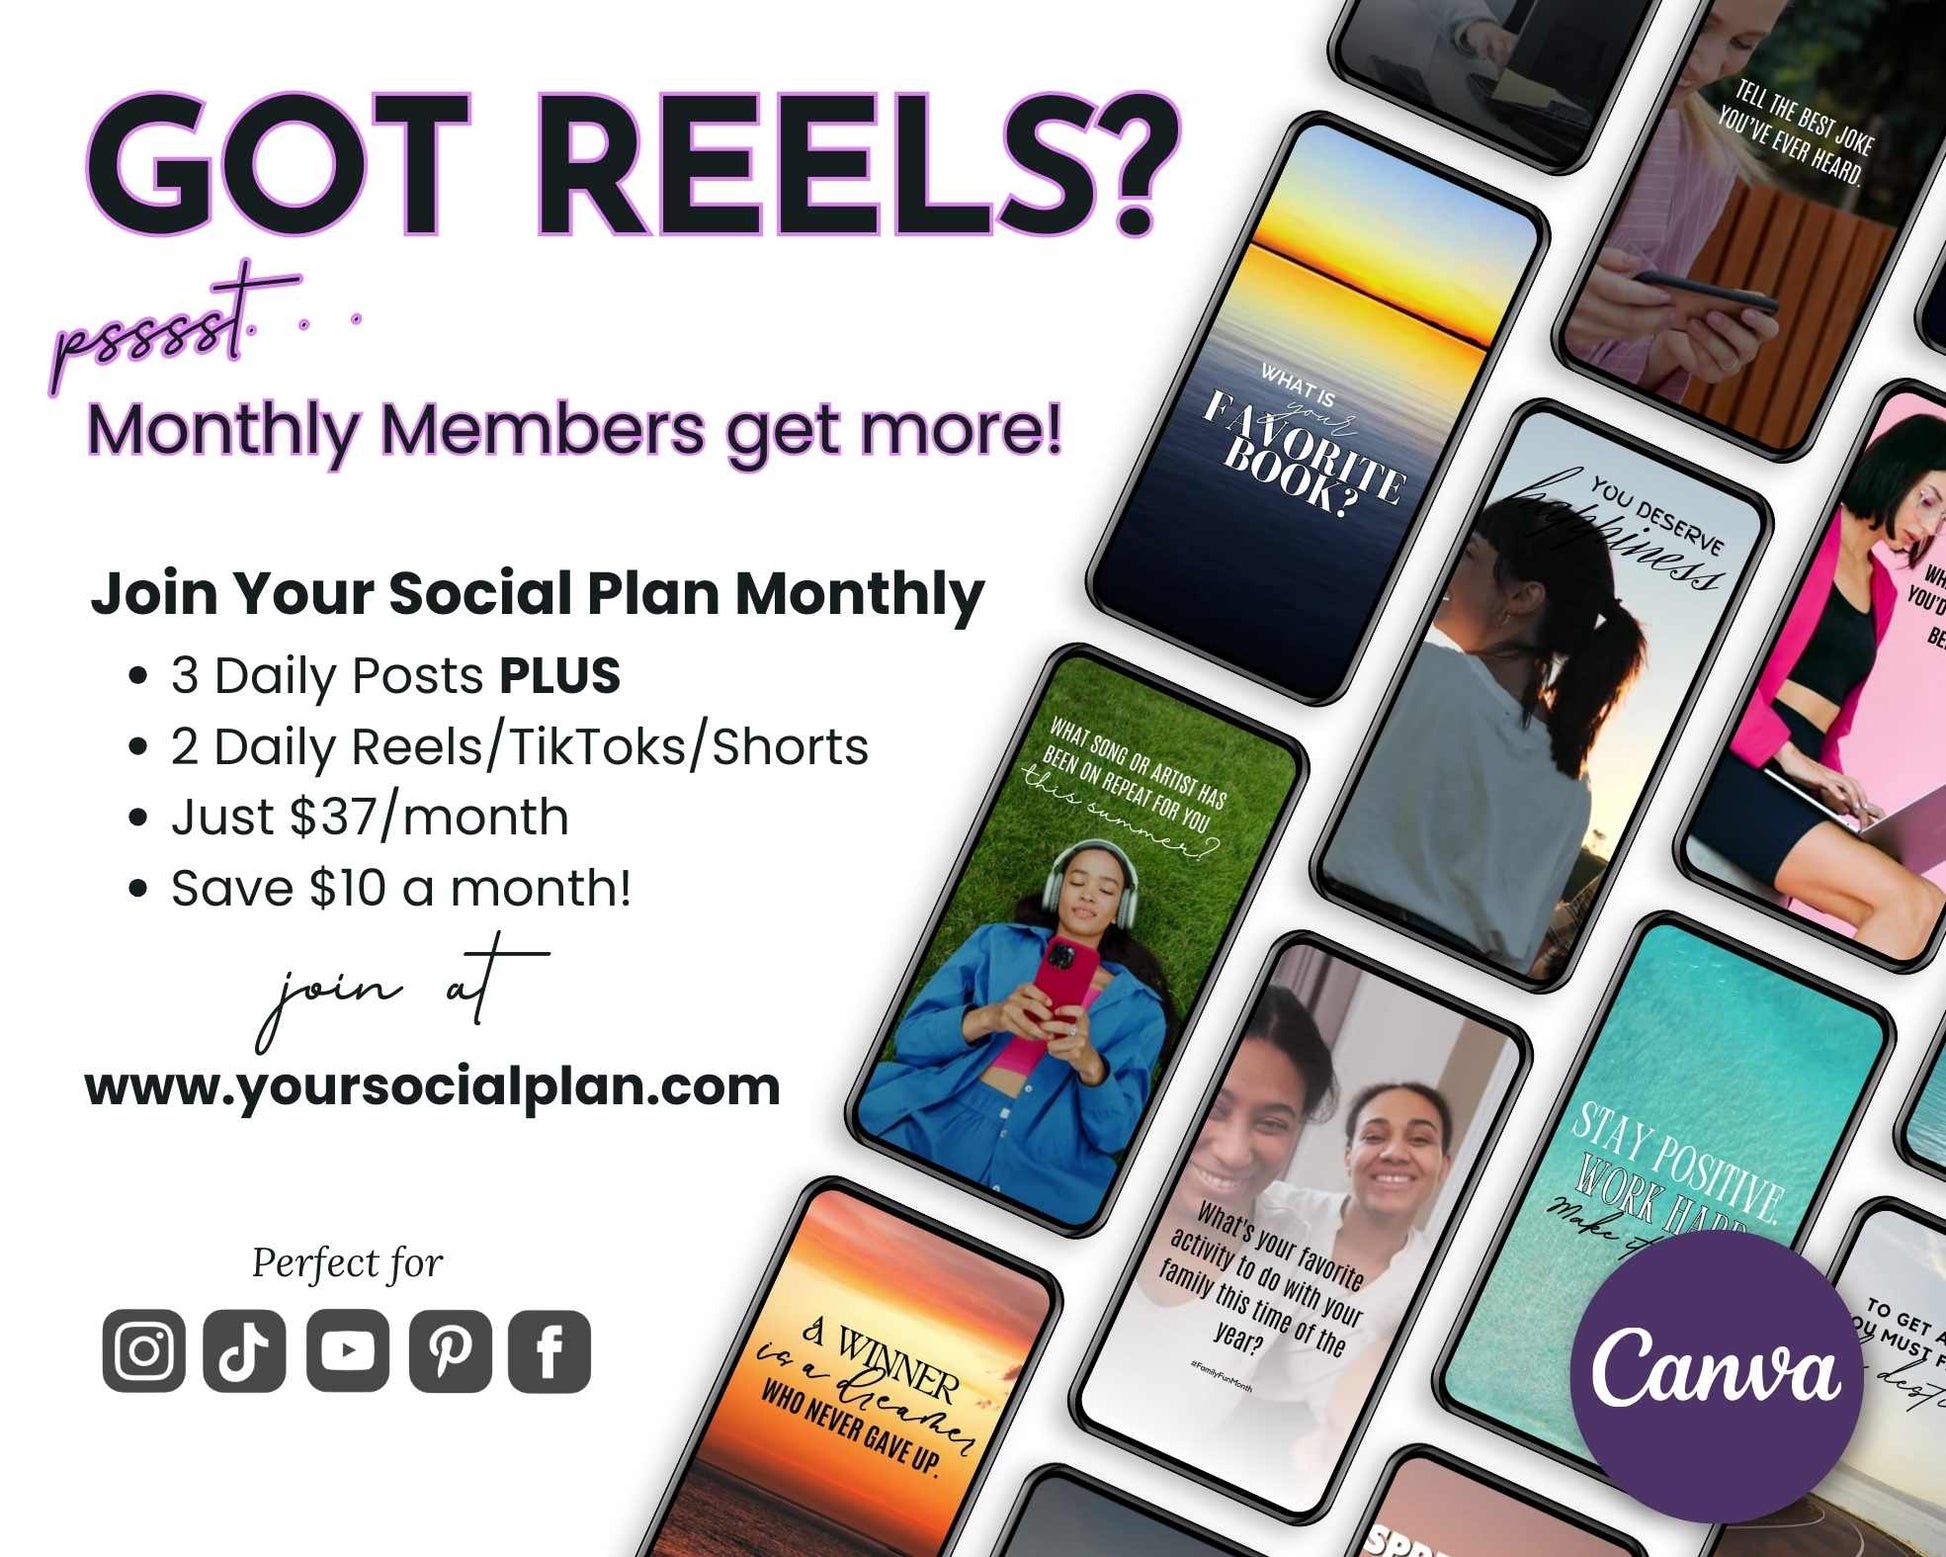 A promotional graphic for Get Socially Inclined's AUGUST Daily Posting Plan - Your Social Plan featuring multiple phone screens with sample reels and a list of benefits, including daily posts, reels, and a $10 monthly savings. Enhance your social media presence effortlessly!